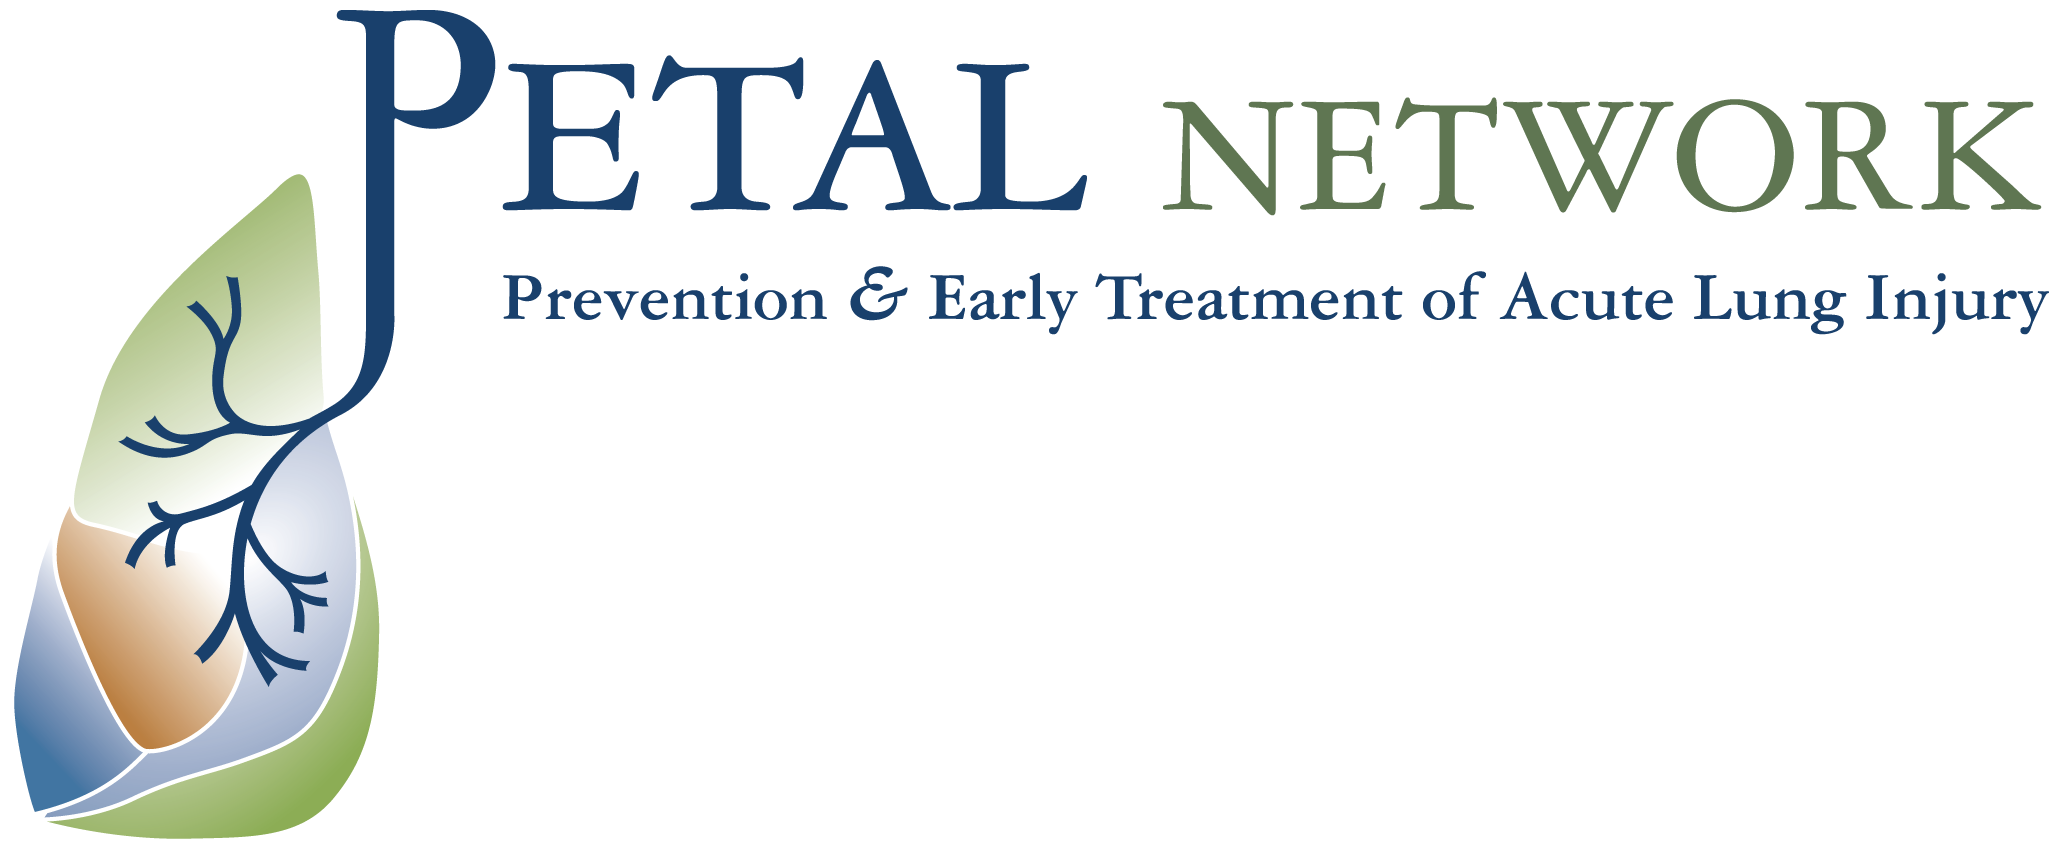 PETAL Network: Prevention & Early Treatment of Acute Lung Injury